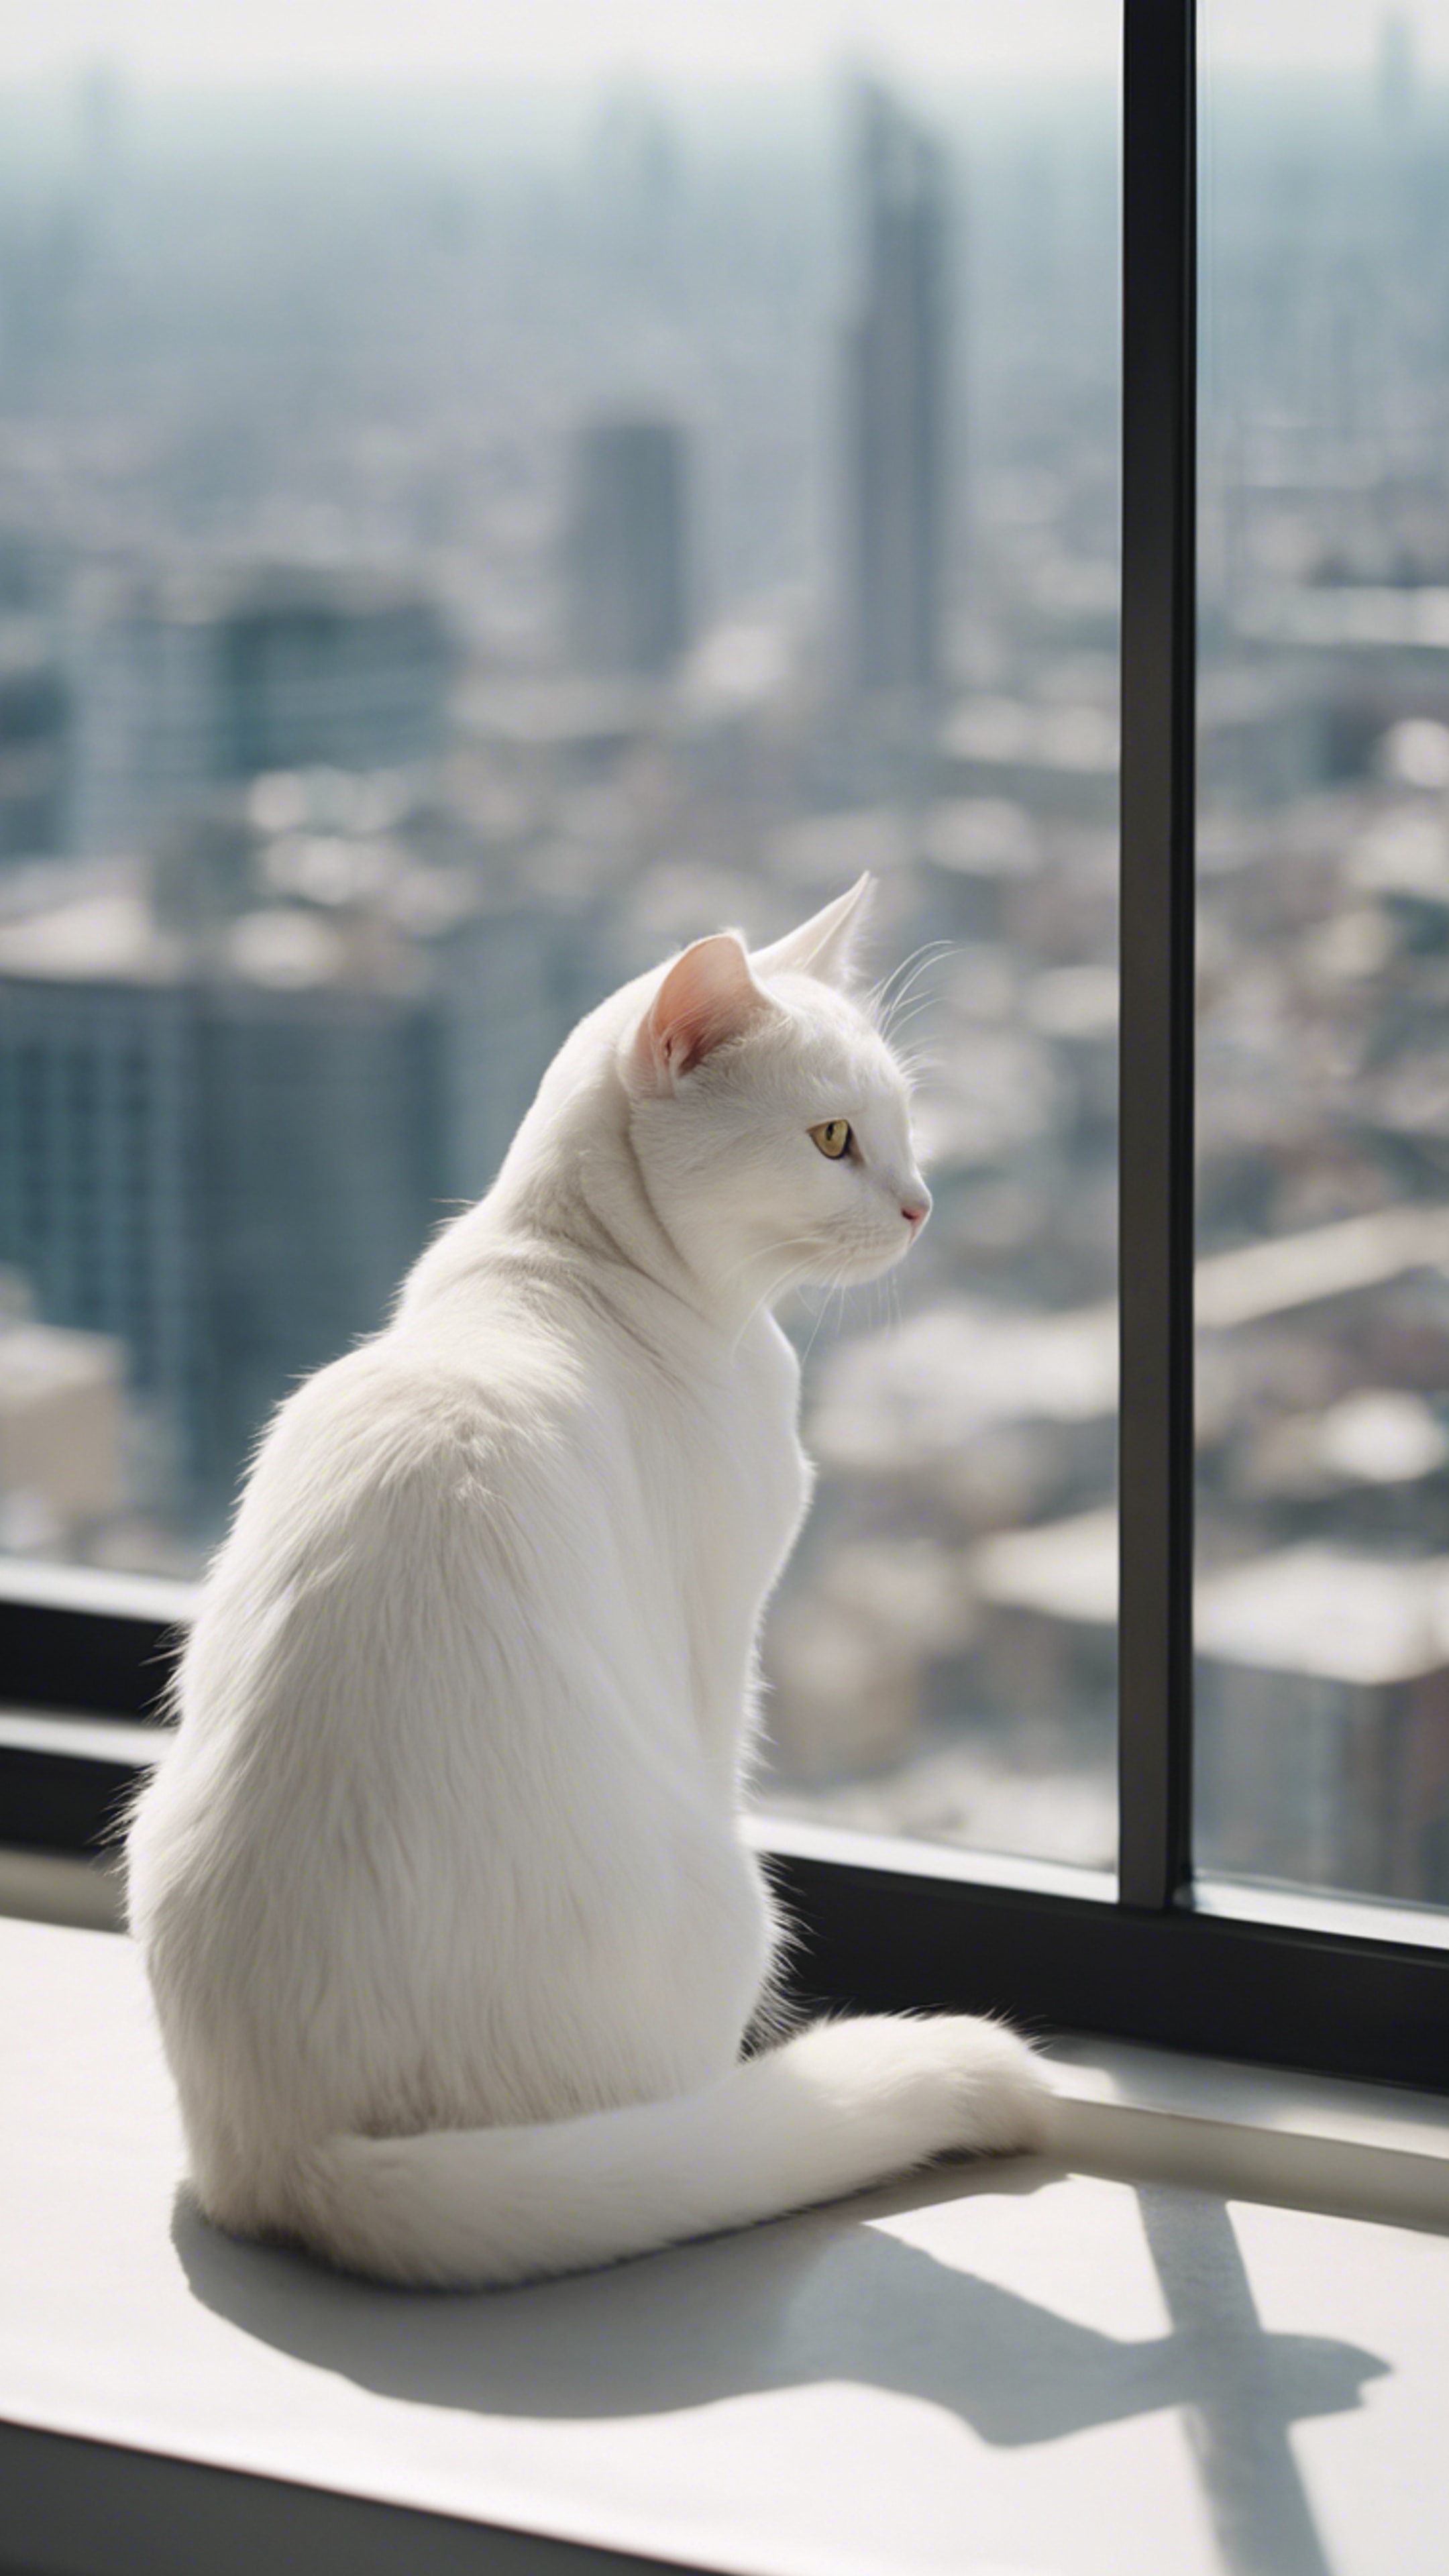 A white cat lying peacefully on a windowsill, admiring a city view from a skyscraper. Tapeta[751c381e97644d32a2eb]